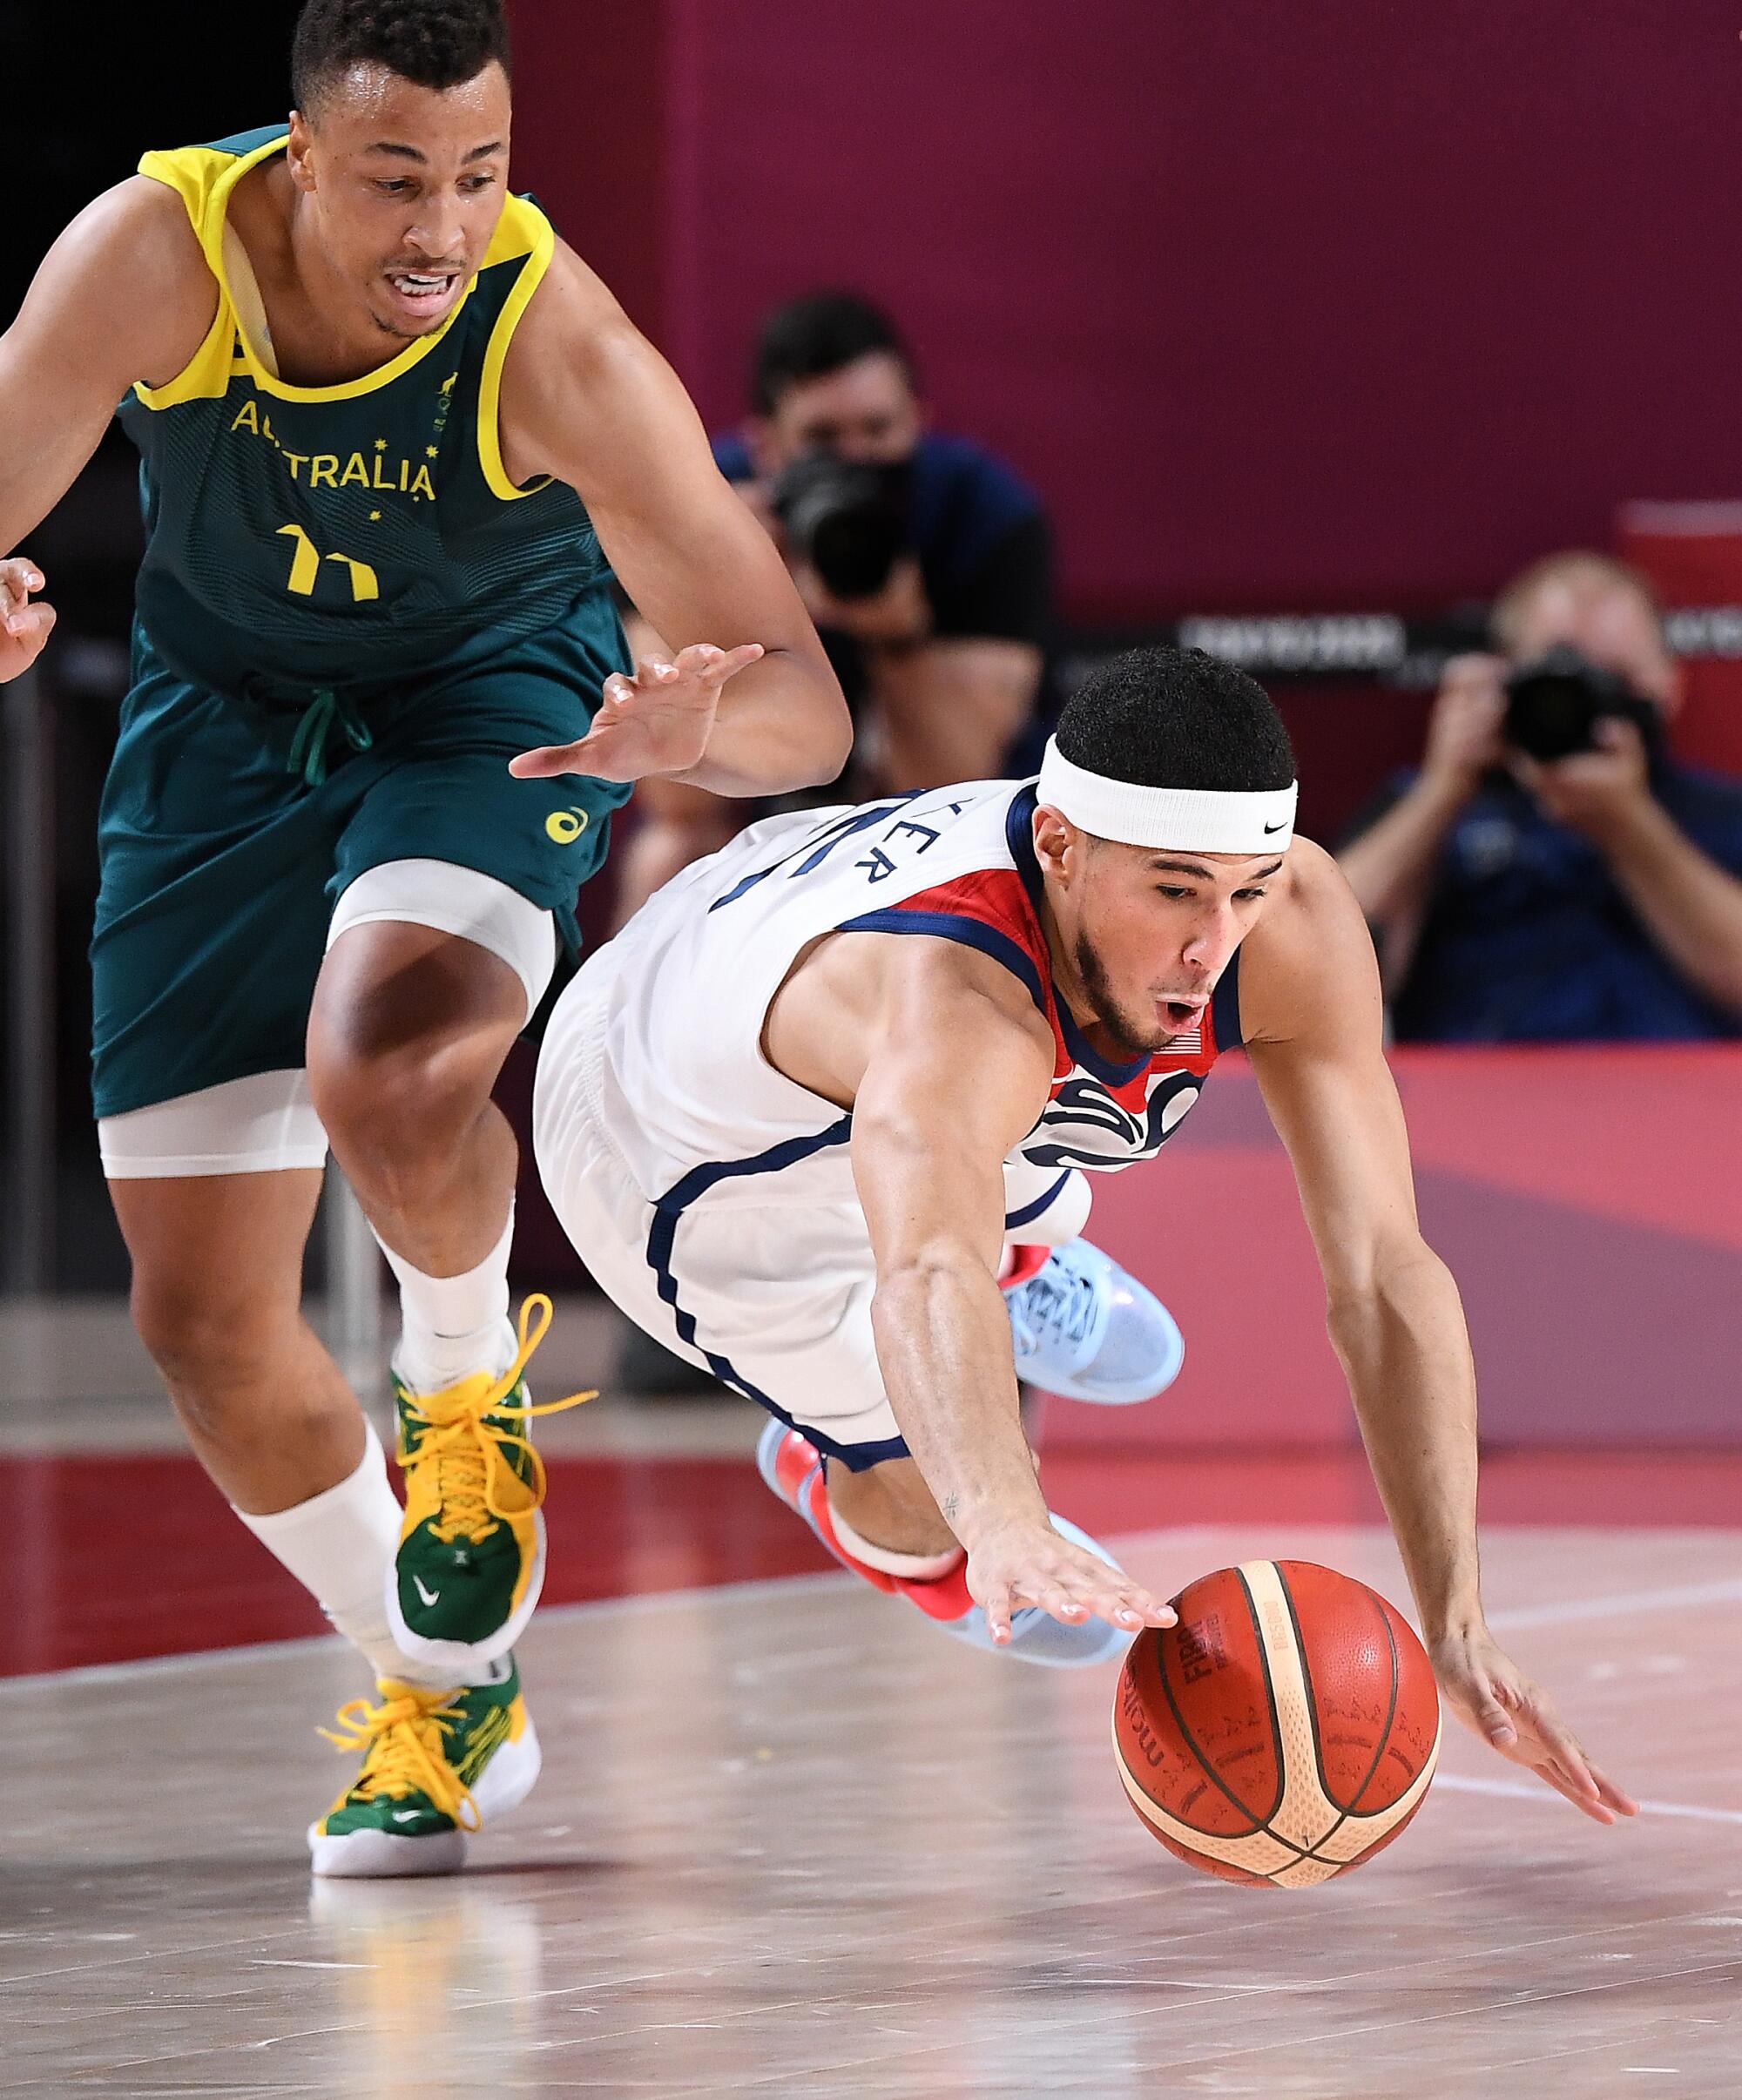 Devin Booker dives for the basketball in front of Australia’s Dante Exum at the Tokyo Olympics.